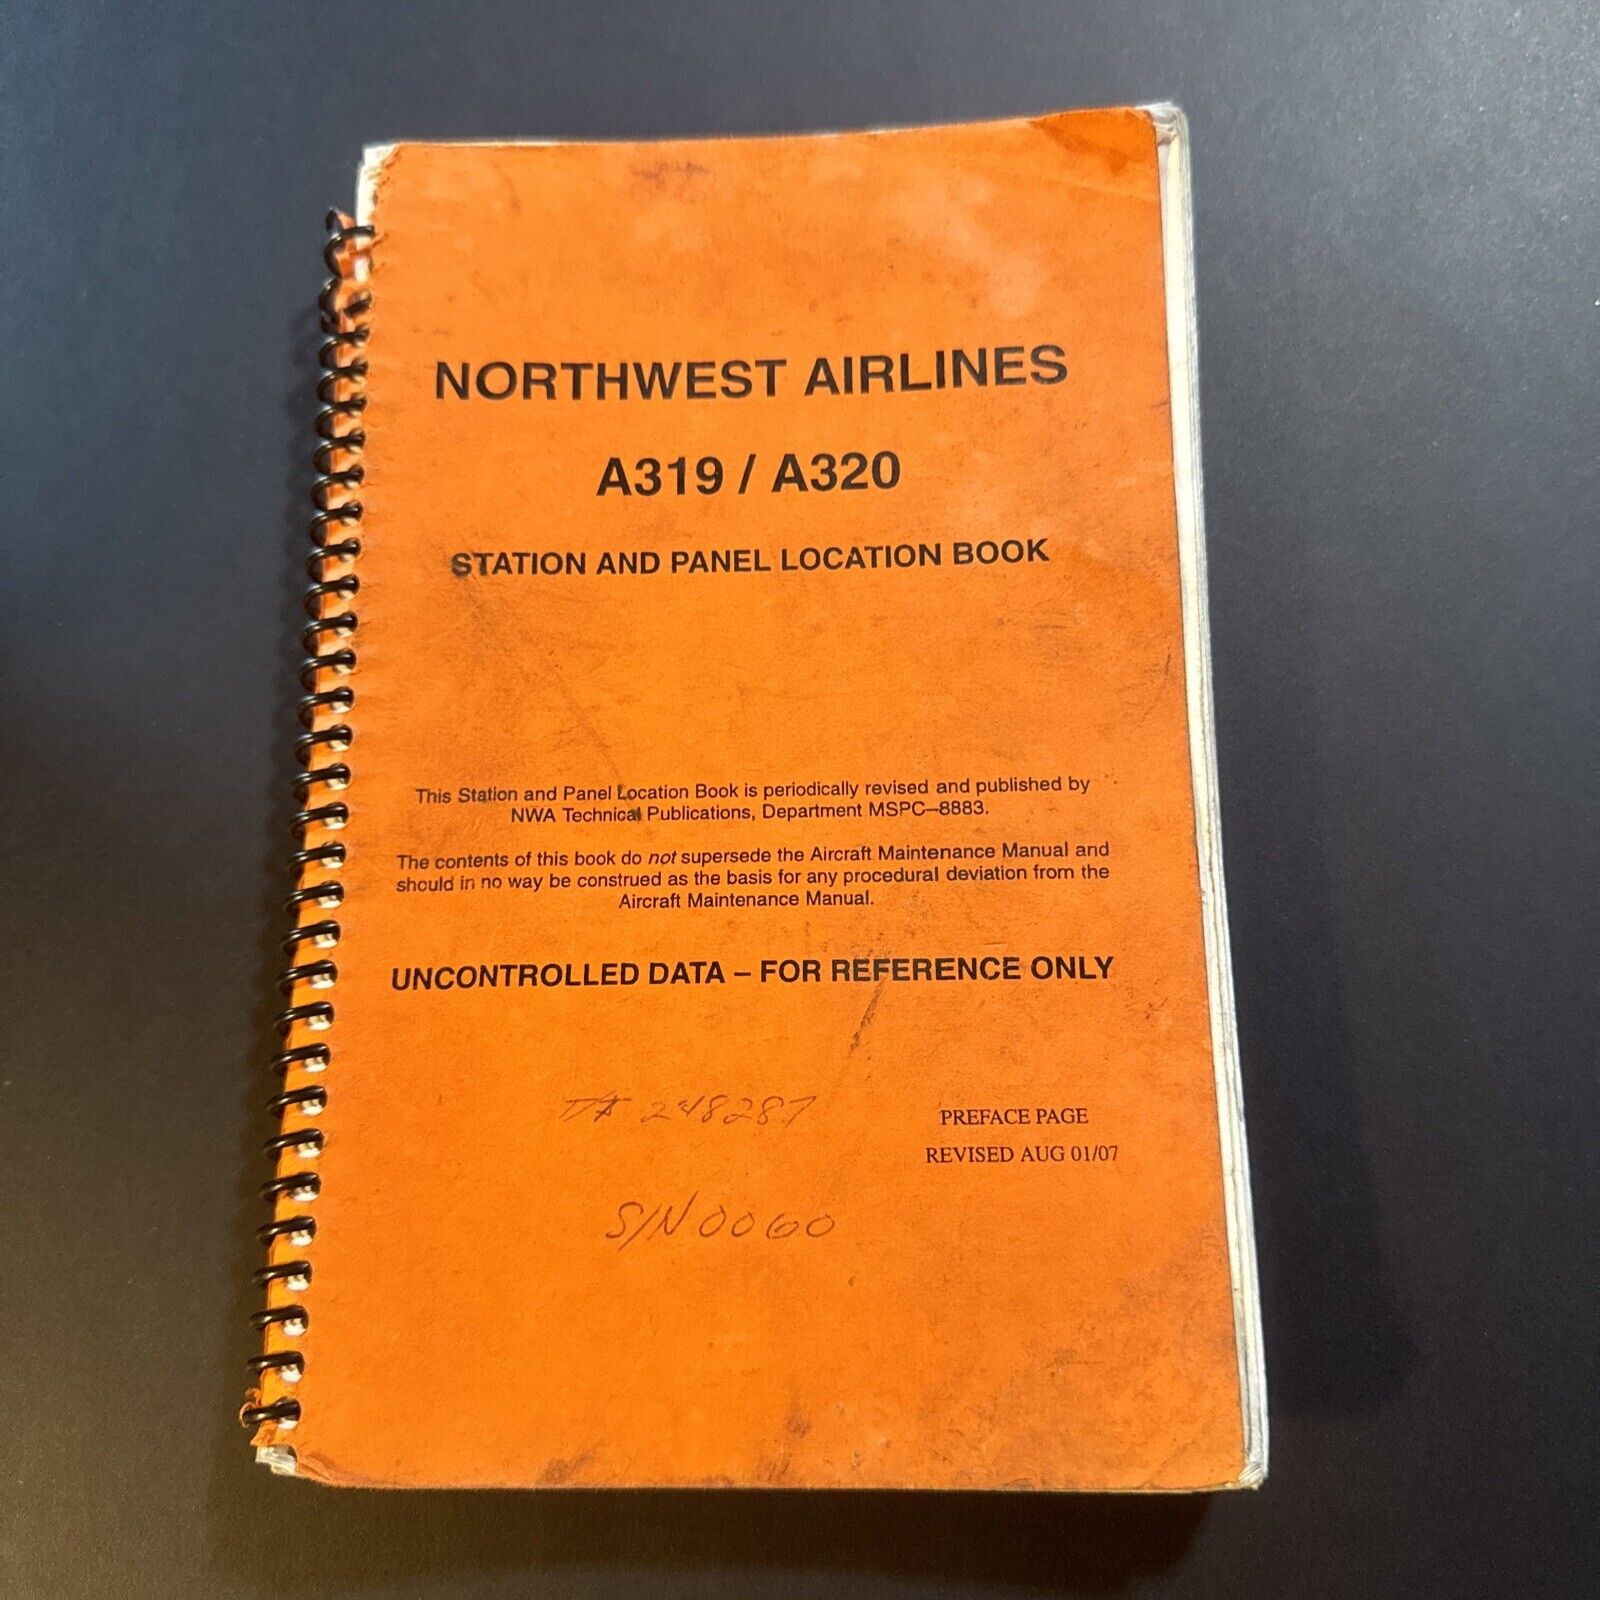 NORTHWEST AIRLINES Airbus A319 A320 Station and Panel Location Book Aug 07